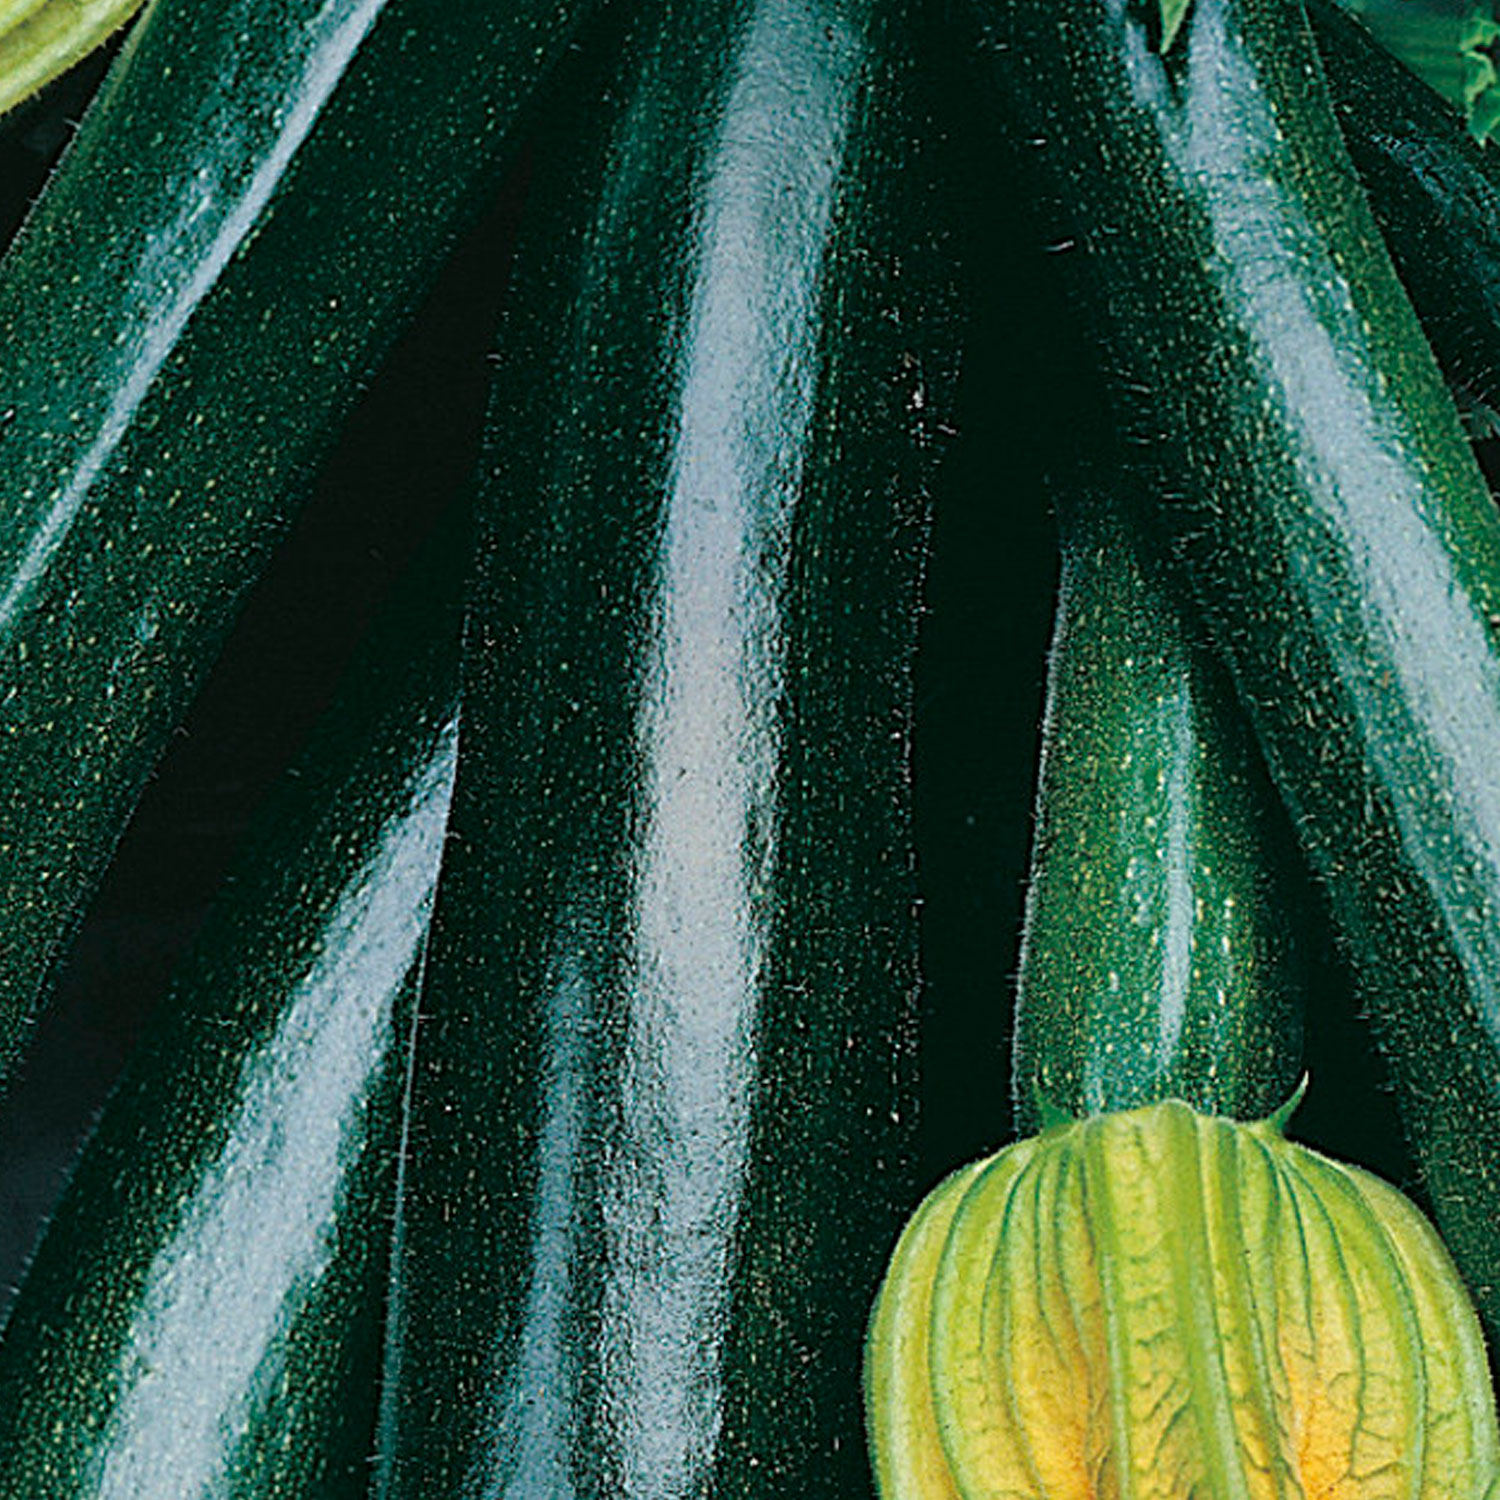 Johnsons Organic Black Beauty Courgette Seeds Image 1